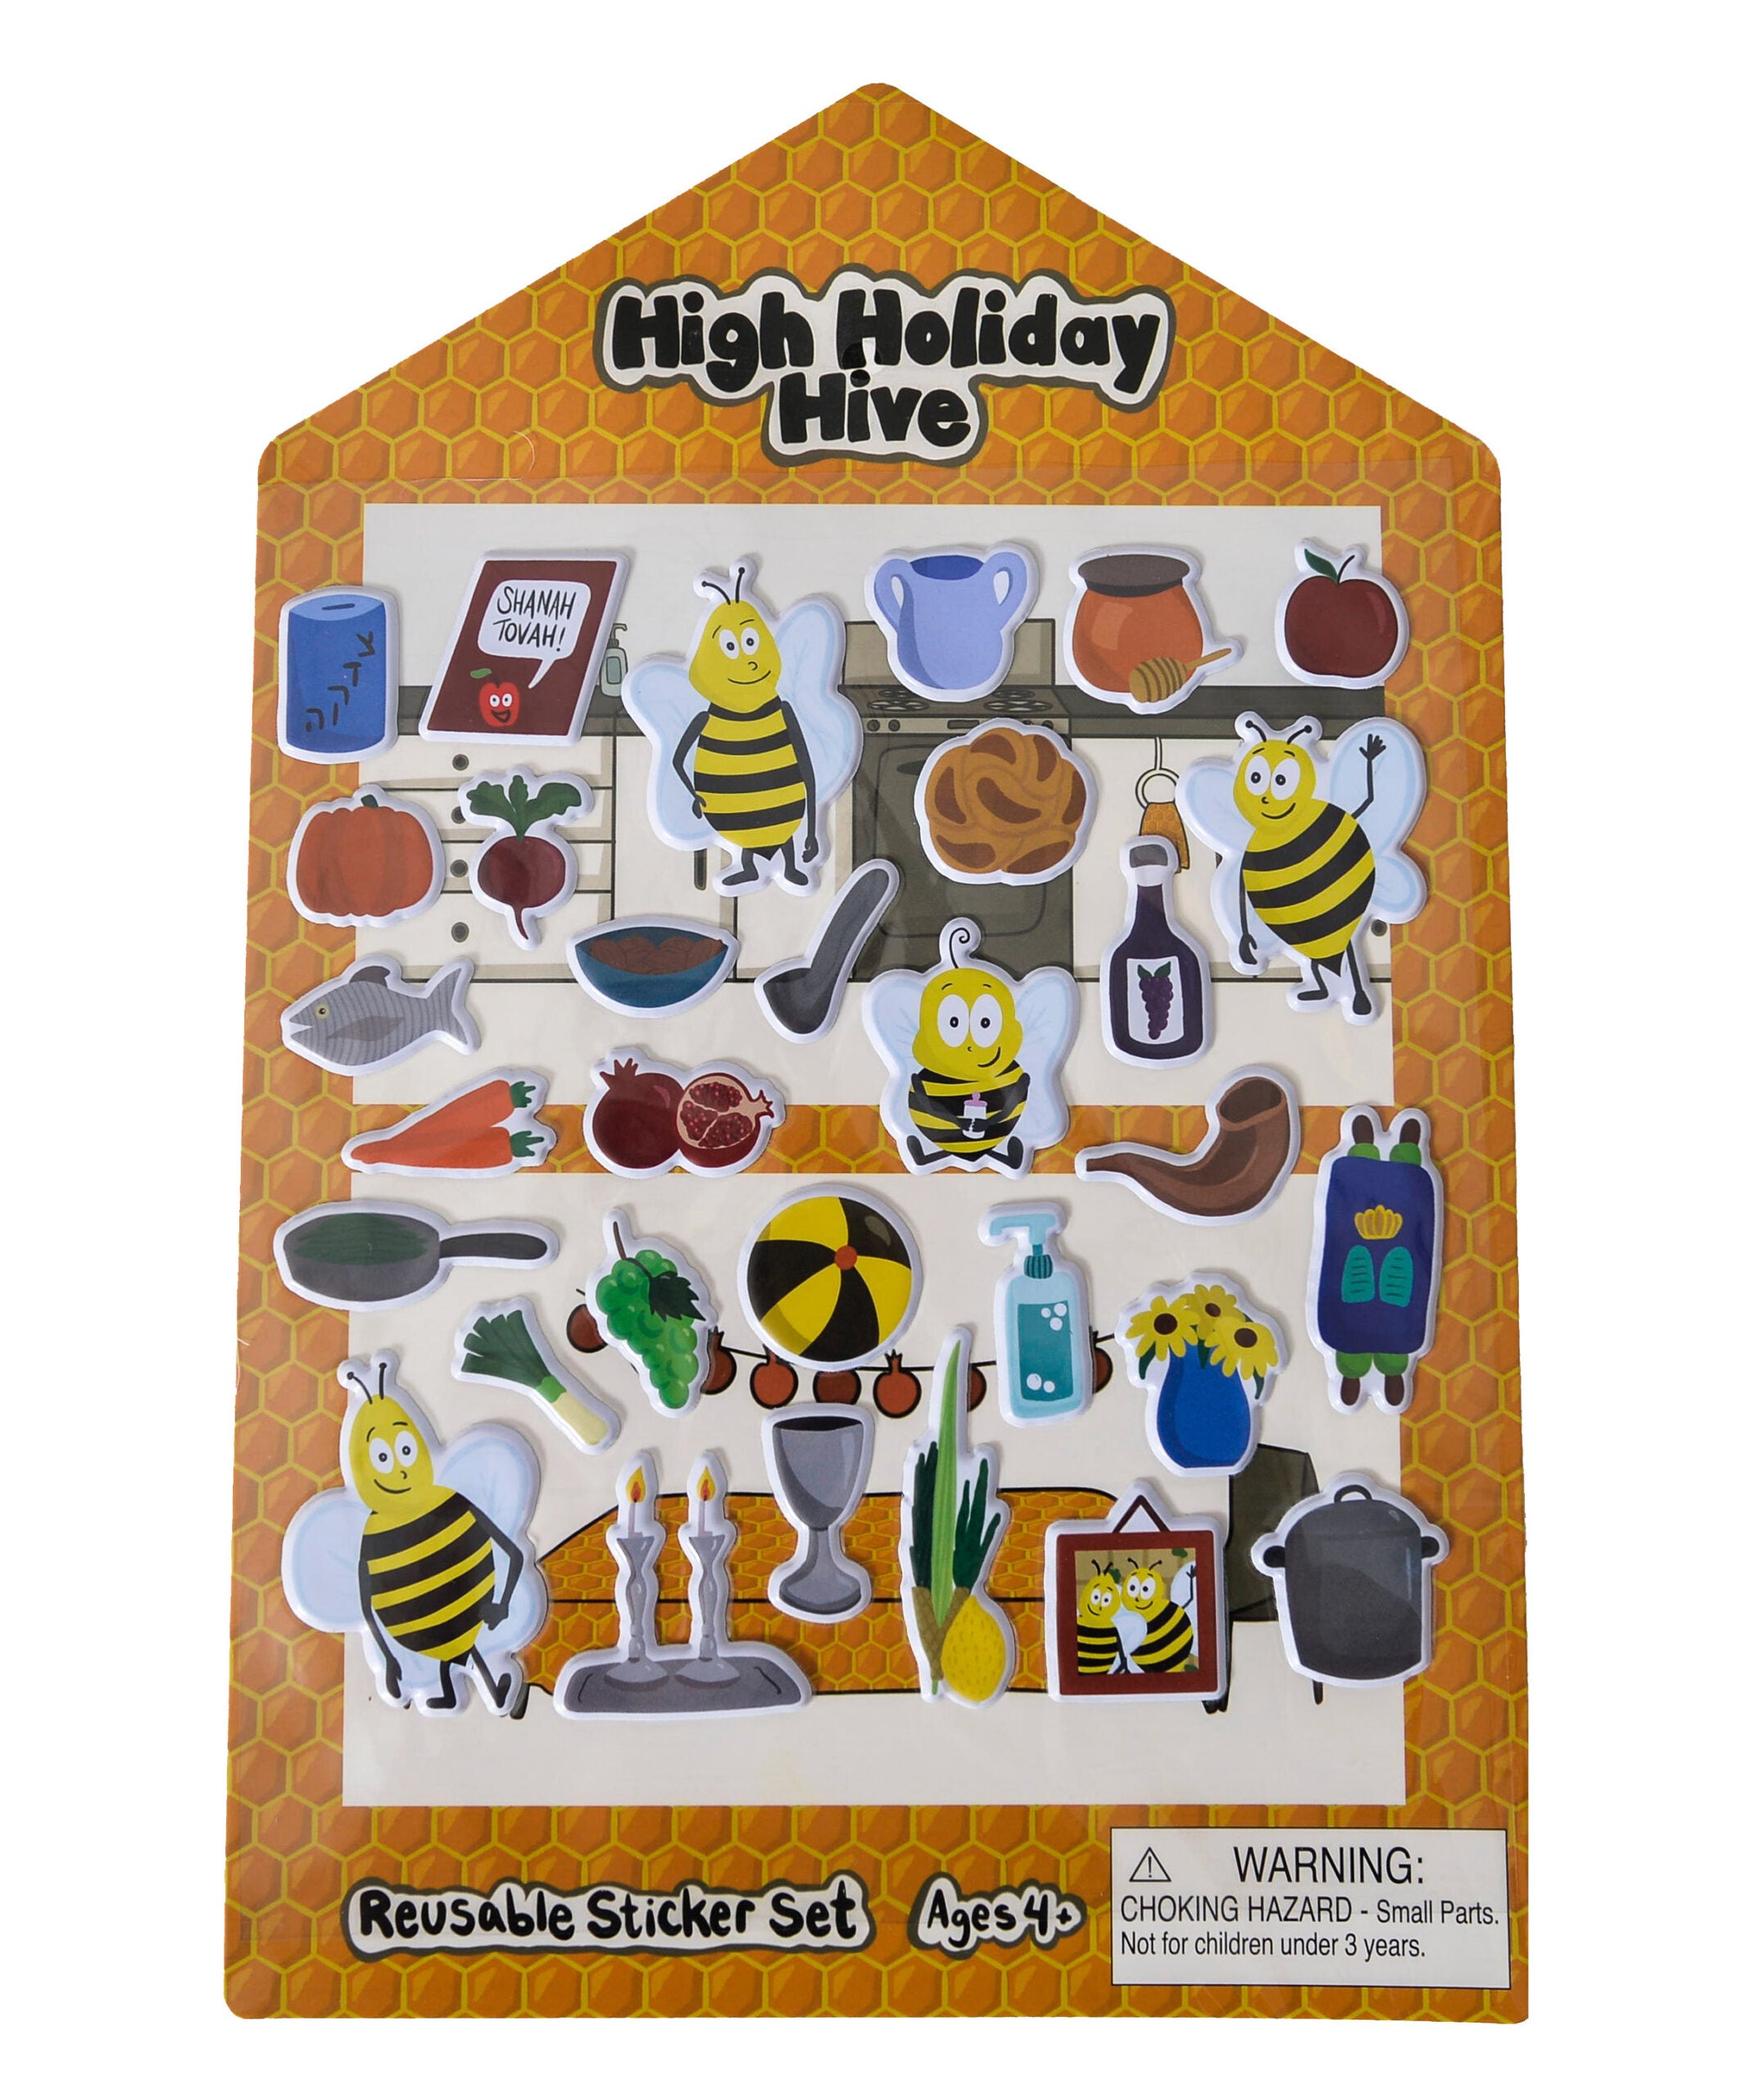 High Holiday Hive